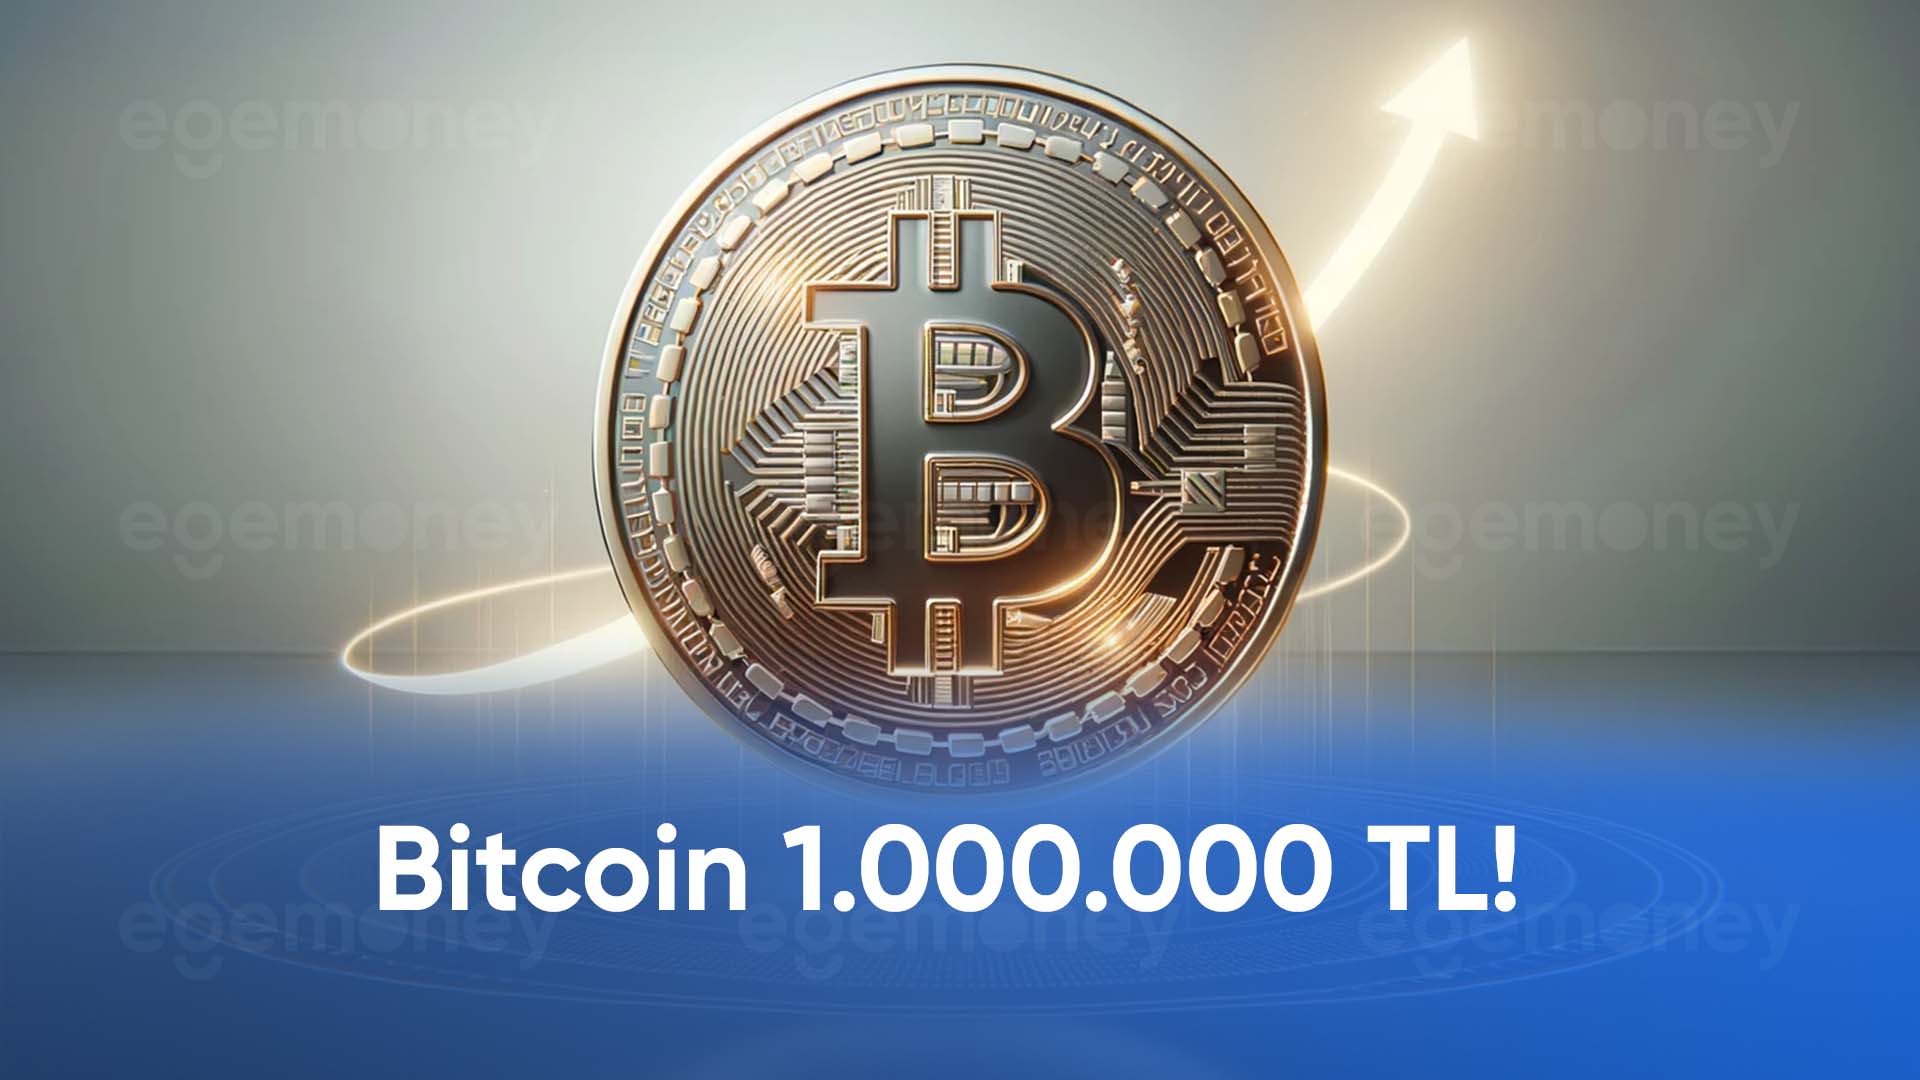 Bitcoin Reached the Level of 1 Million TL!